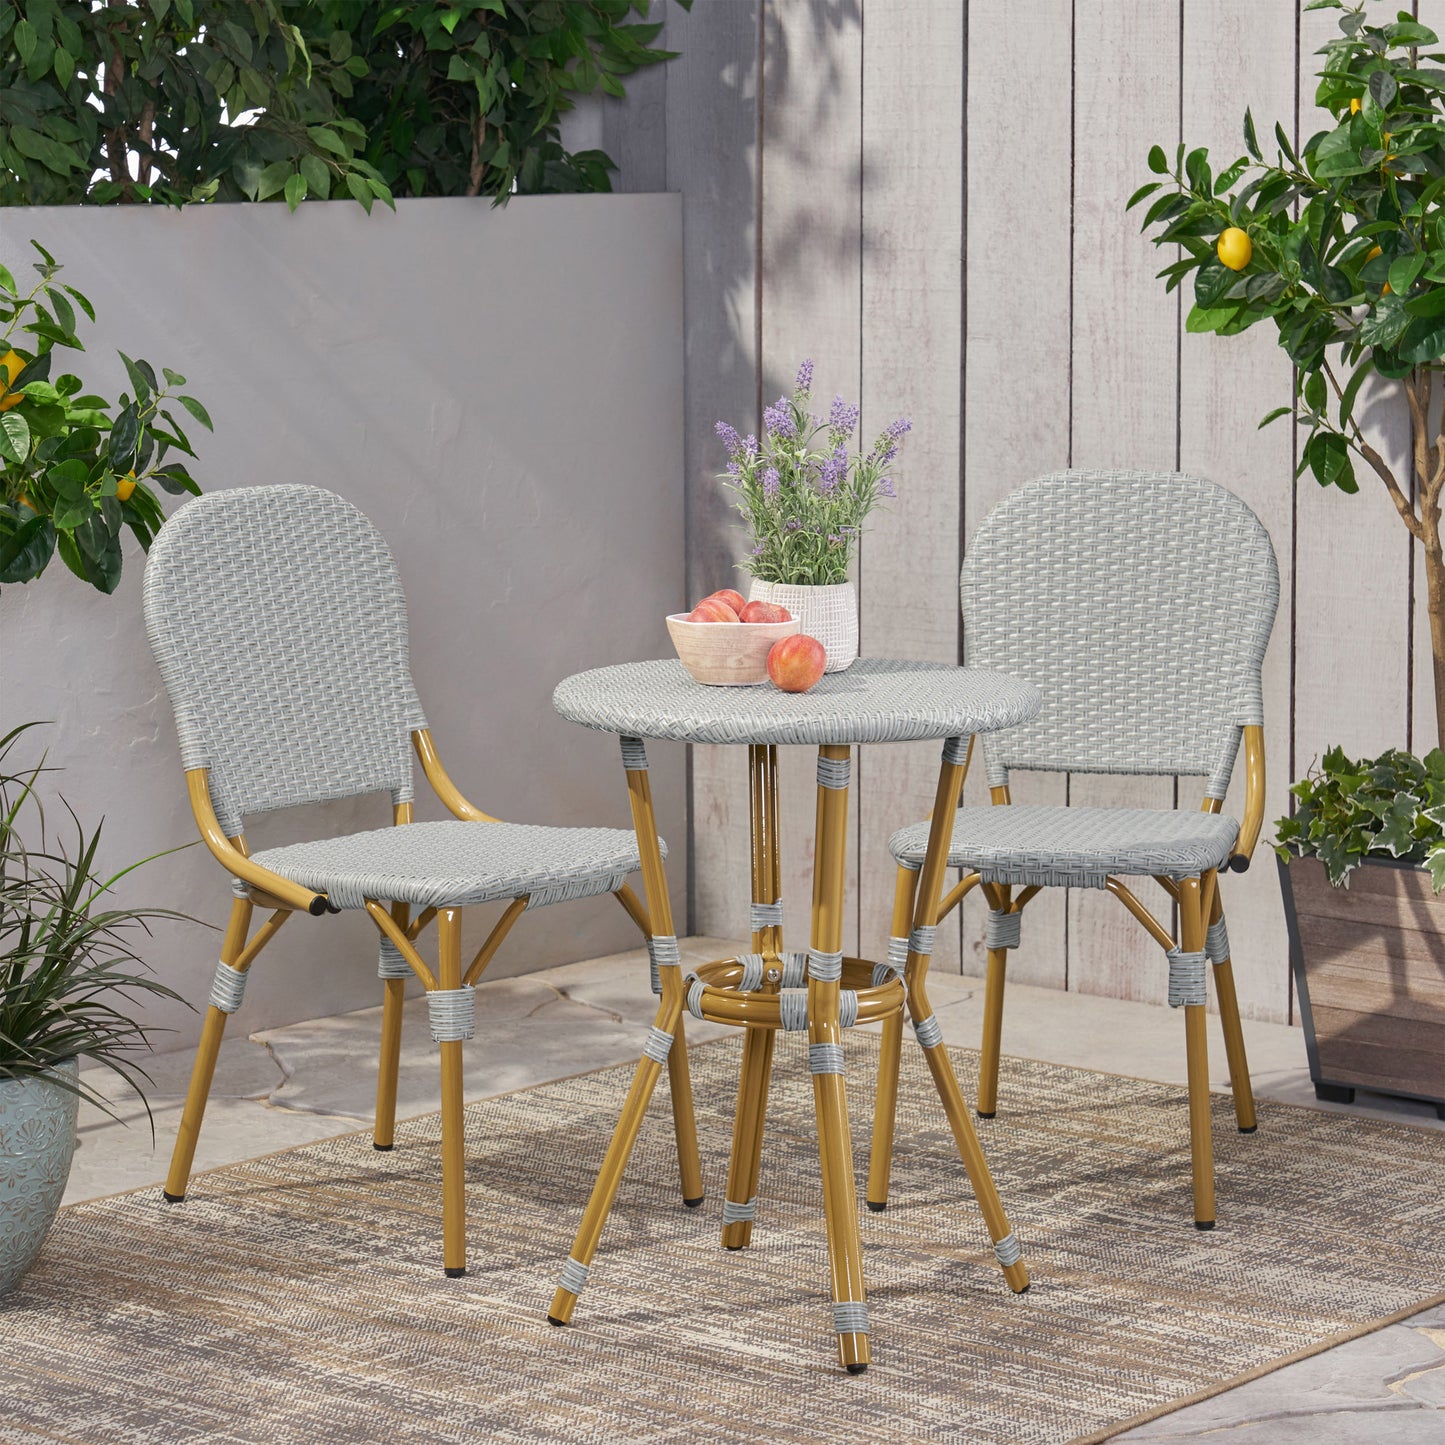 Gallia Outdoor Aluminum French Bistro Set, Gray and Bamboo Print